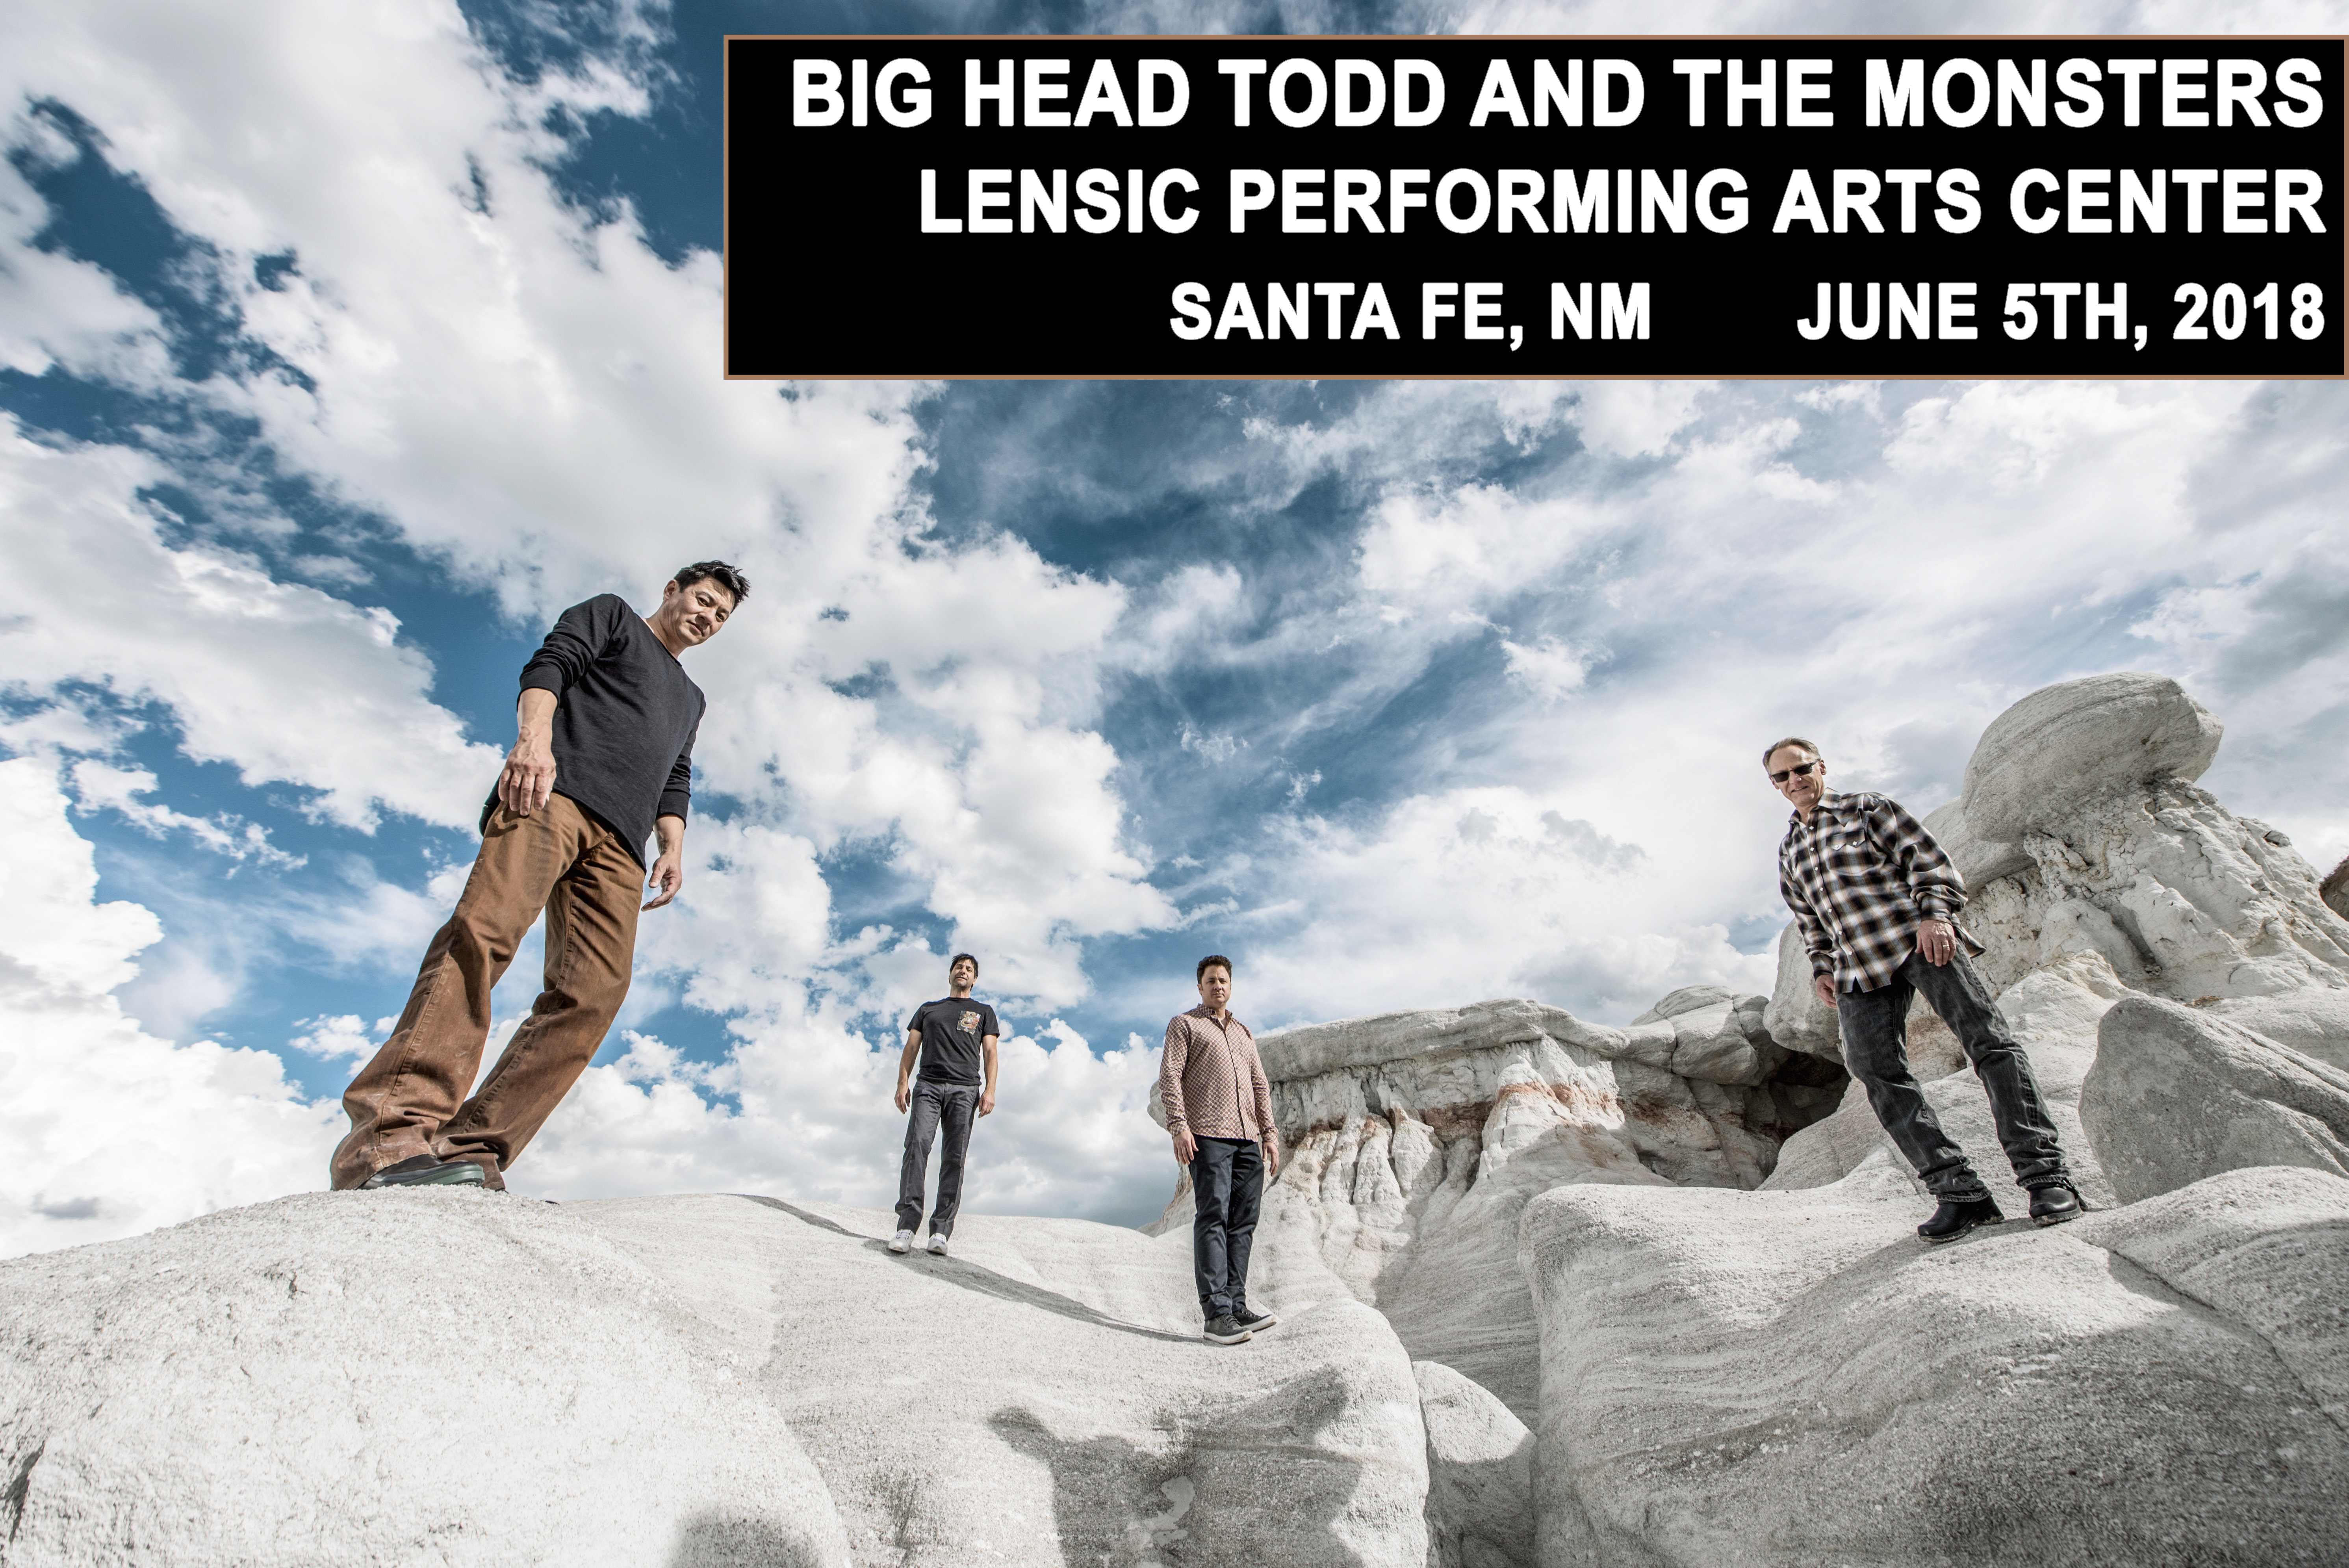 Big Head Todd headlining Lensic Performing Arts Center on June 5th in Santa Fe - Tickets on sale NOW! 